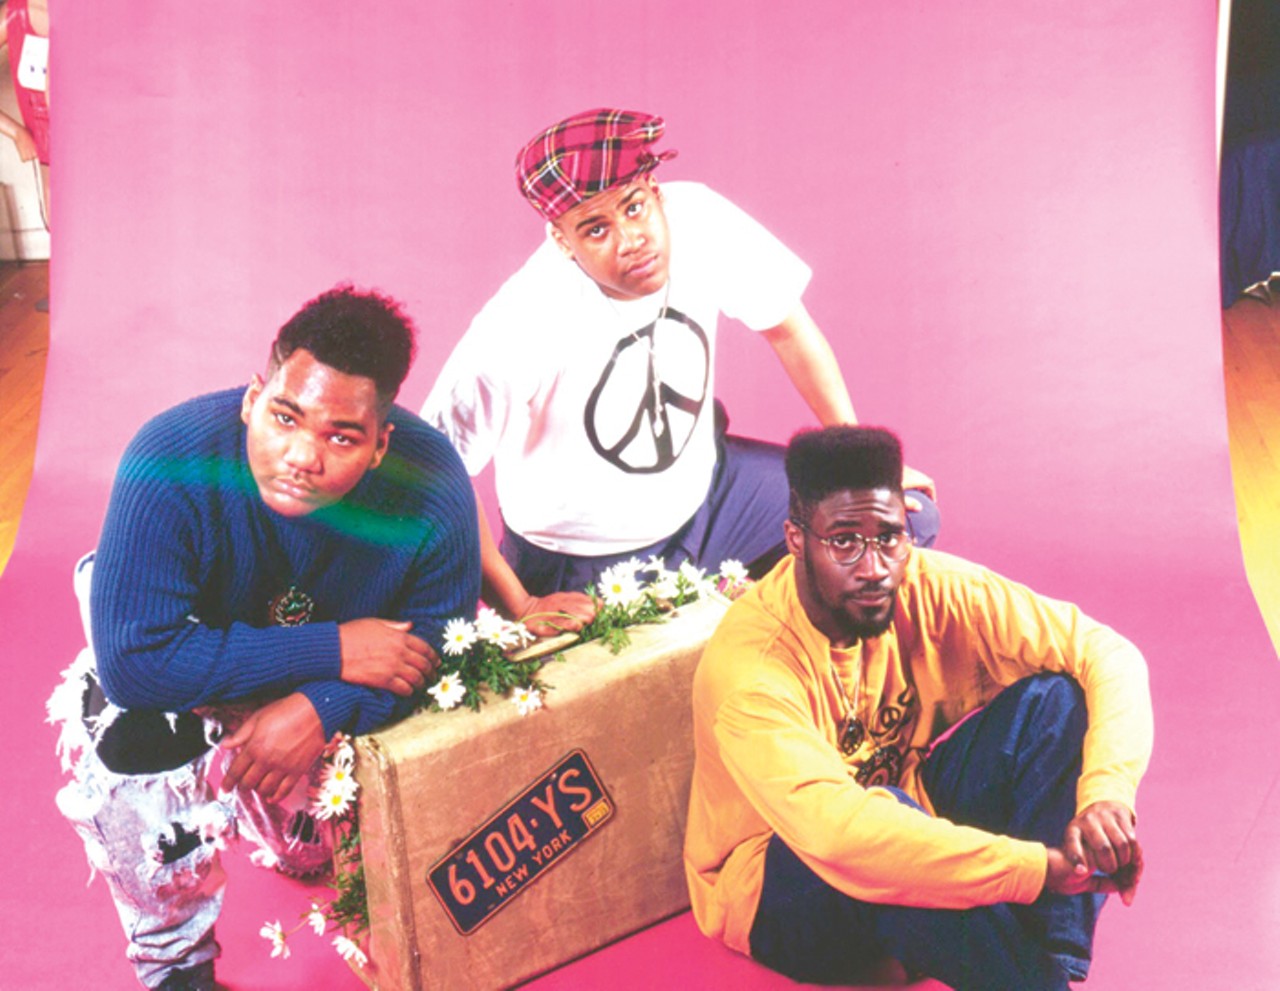 FRIDAY, 07
Dilla Day • De La Soul
De La Soul has been around since ’87, which makes sense to us because we can remember kicking back to “Me Myself and I” at high school. That 3 Feet High and Rising album was and remains a killer, but it shouldn’t be forgotten that the band has released a ton of material since then and most of it is great. It often is forgotten, but it shouldn’t be. Don’t panic though; they’ll also play “Say No Go” and “The Magic Number.” This show is a celebration of the Detroit talent that was J Dilla, so members of Slum Village will also be performing. Dilla would surely approve. Celebrate Dilla at The Fillmore in Detroit. Tickets start at $35. Doors open at 8 p.m.